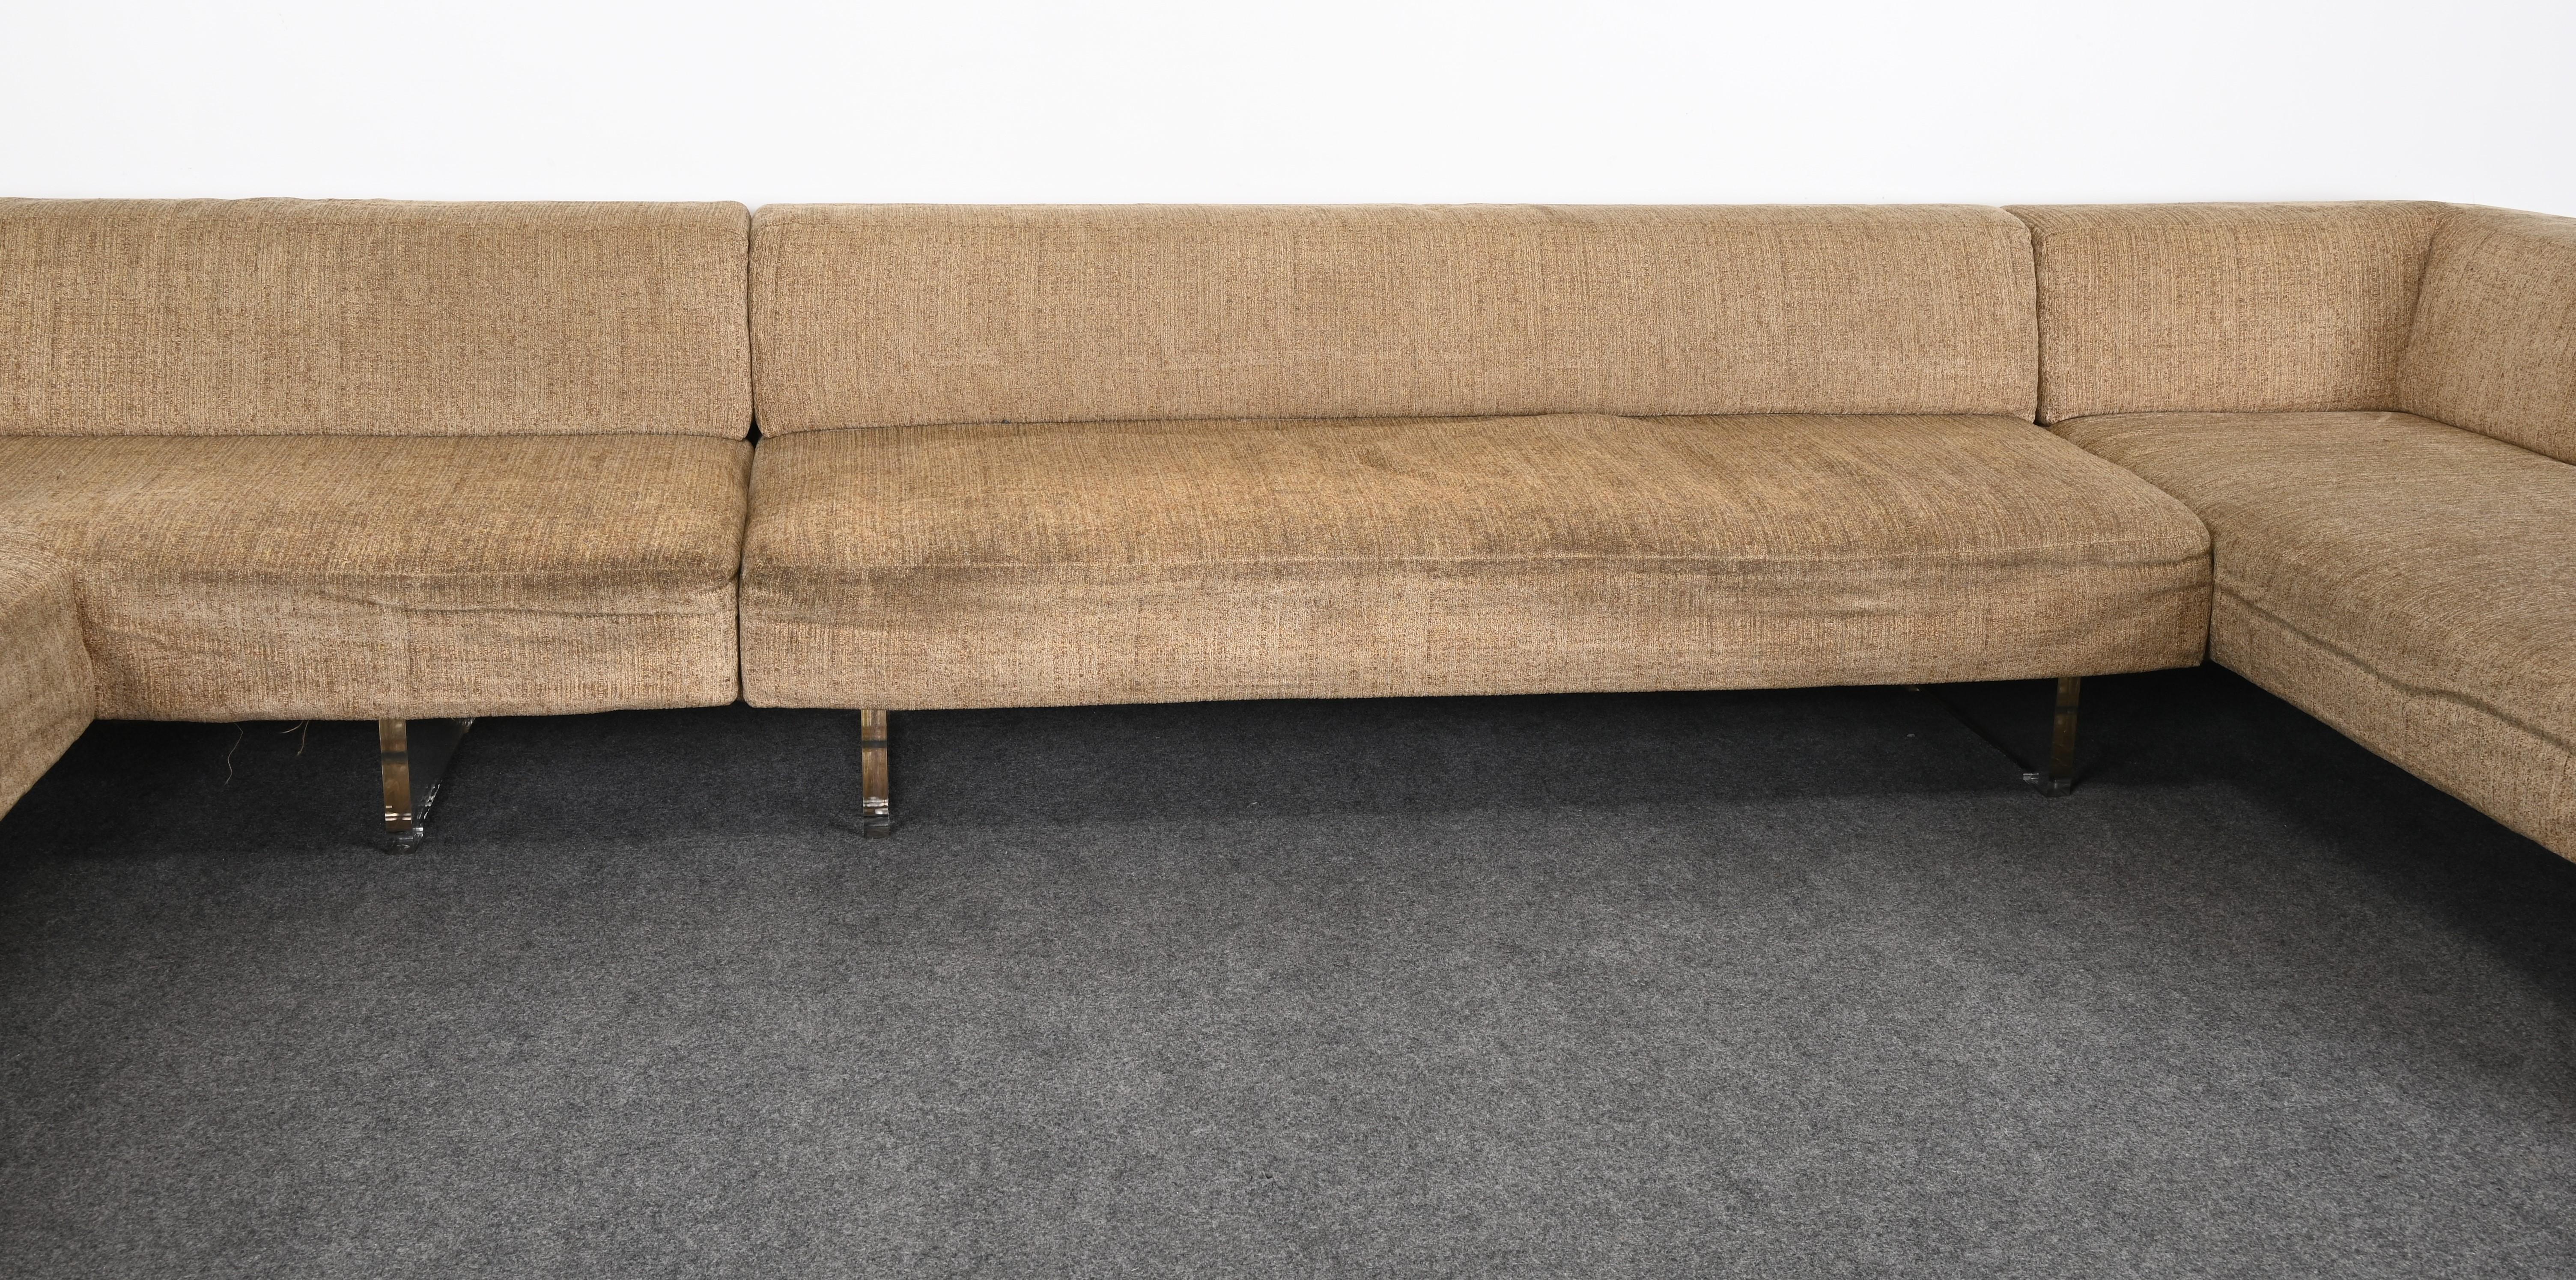 Monumental Sectional Sofa Designed by Vladimir Kagan, 1970s For Sale 2